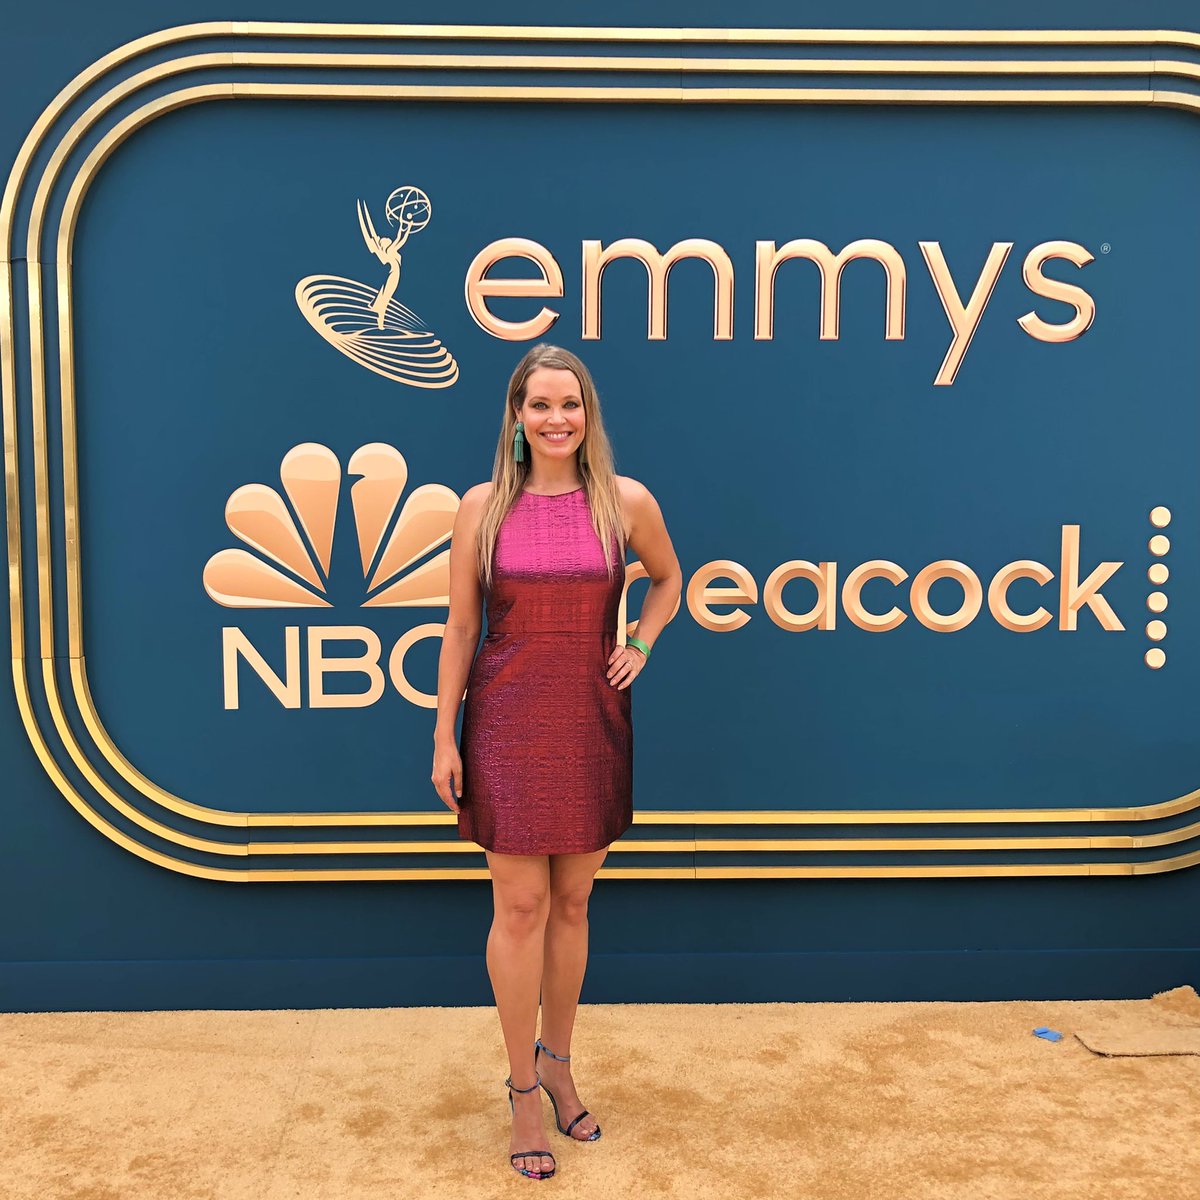 Absolutely honored to cover the Emmys this year! What’s better than talking about my favorite thing in the world - TV?! I just retweeted some of my interview highlights with Lizzo, Jerrod, Ben, Laura and others. 🏆